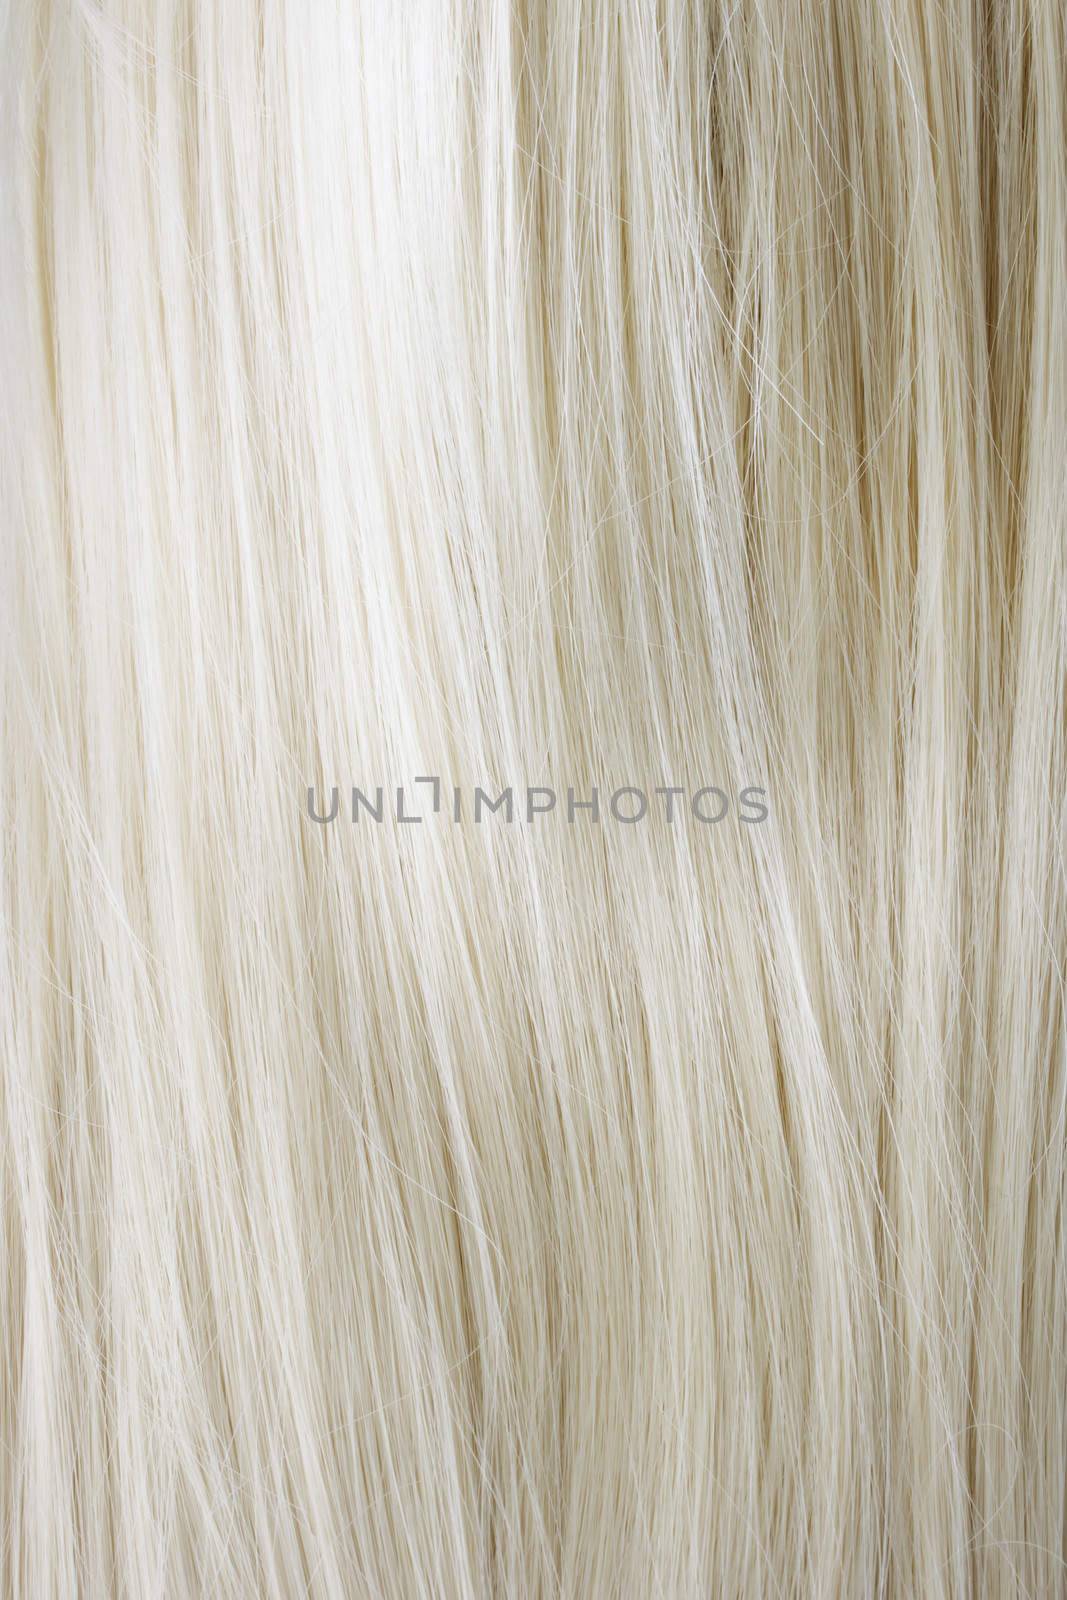 Healthy blonde hair - close up image